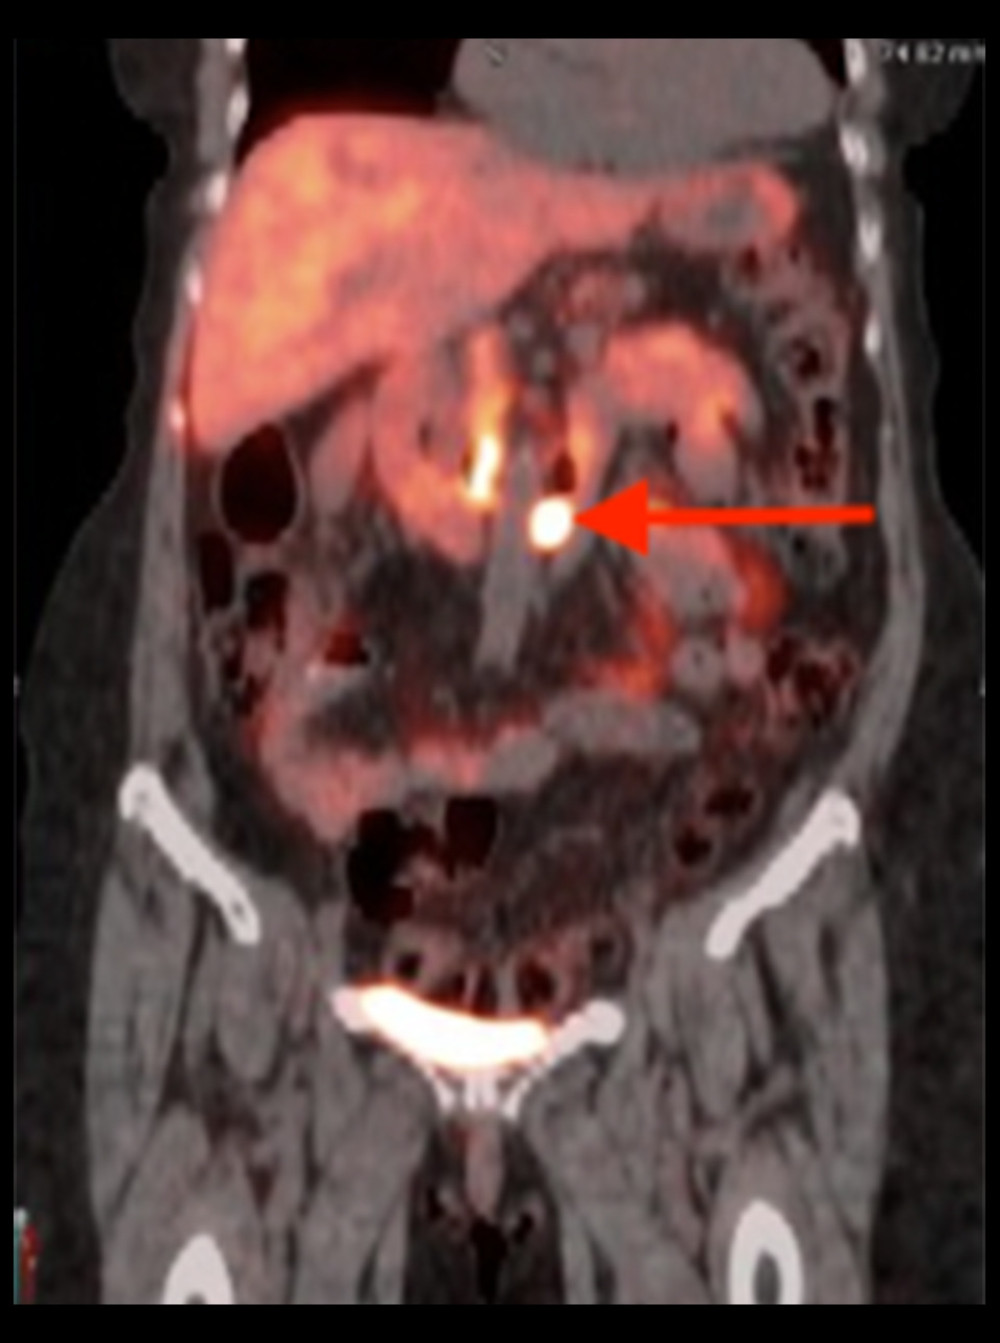 Dotatate PET/CT on December 11, 2019. There are coronal cuts through mid-abdomen. The arrow indicates the area of increased dotatate uptake in para-aortic lymph nodes, indicating widely metastatic neuroendocrine disease.